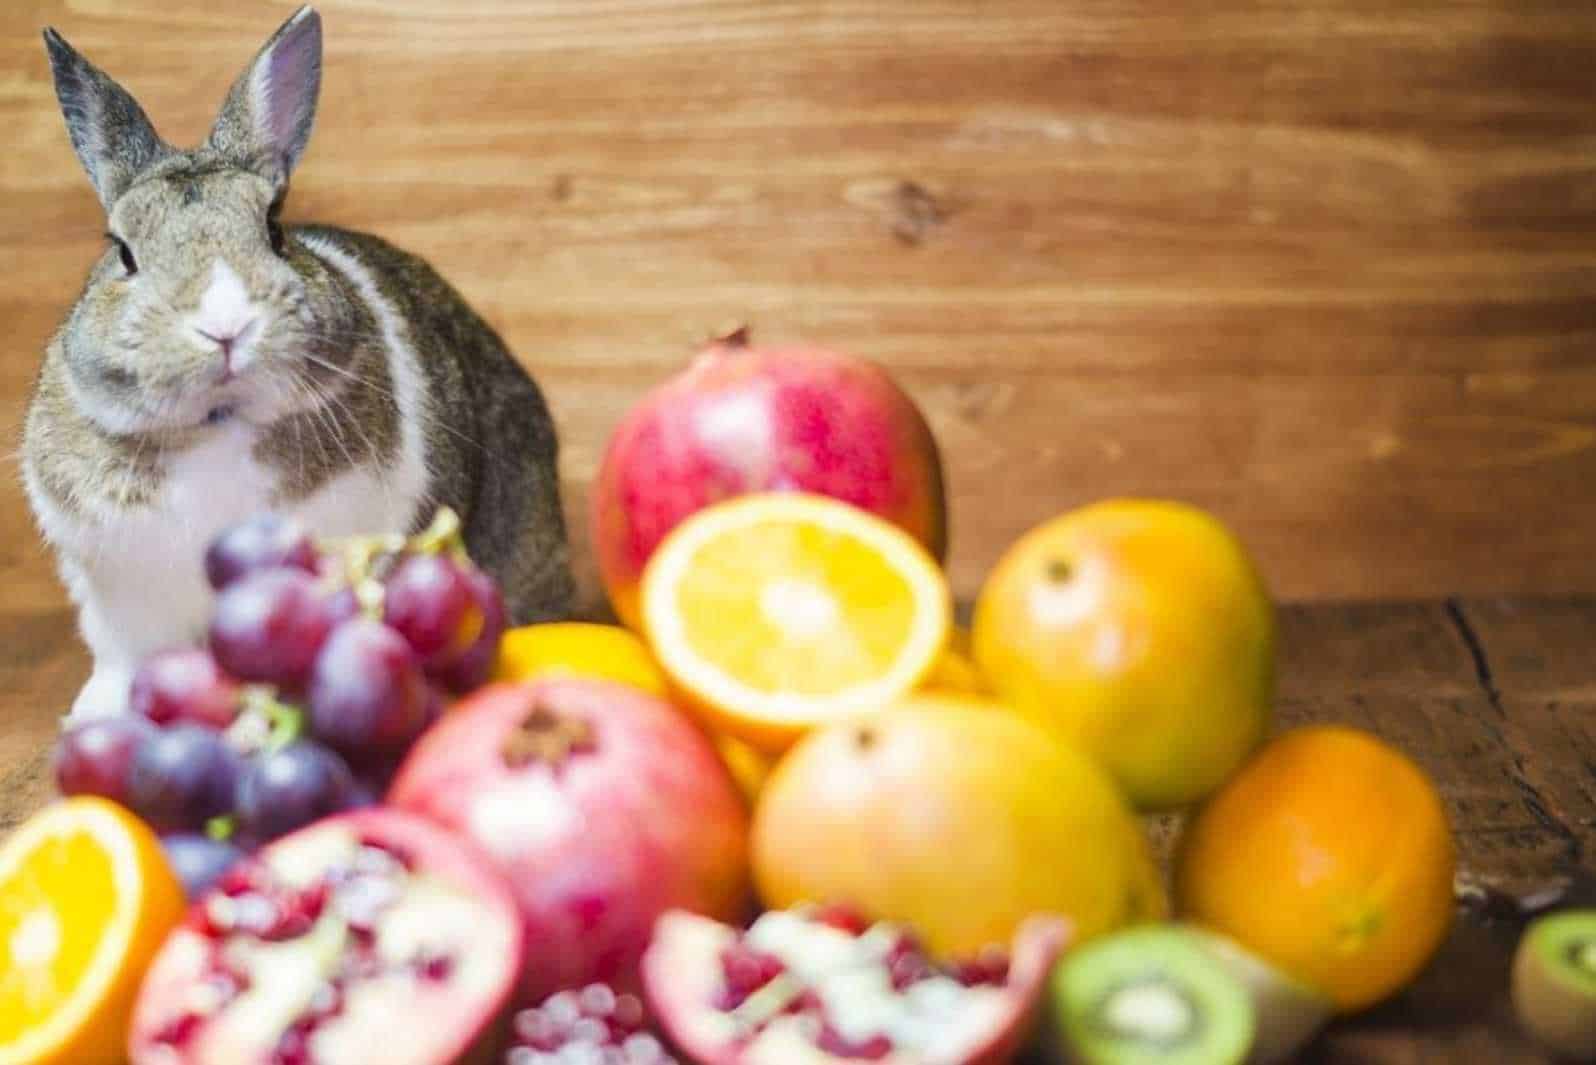 Fruits as Part of Your Rabbit’s Diet